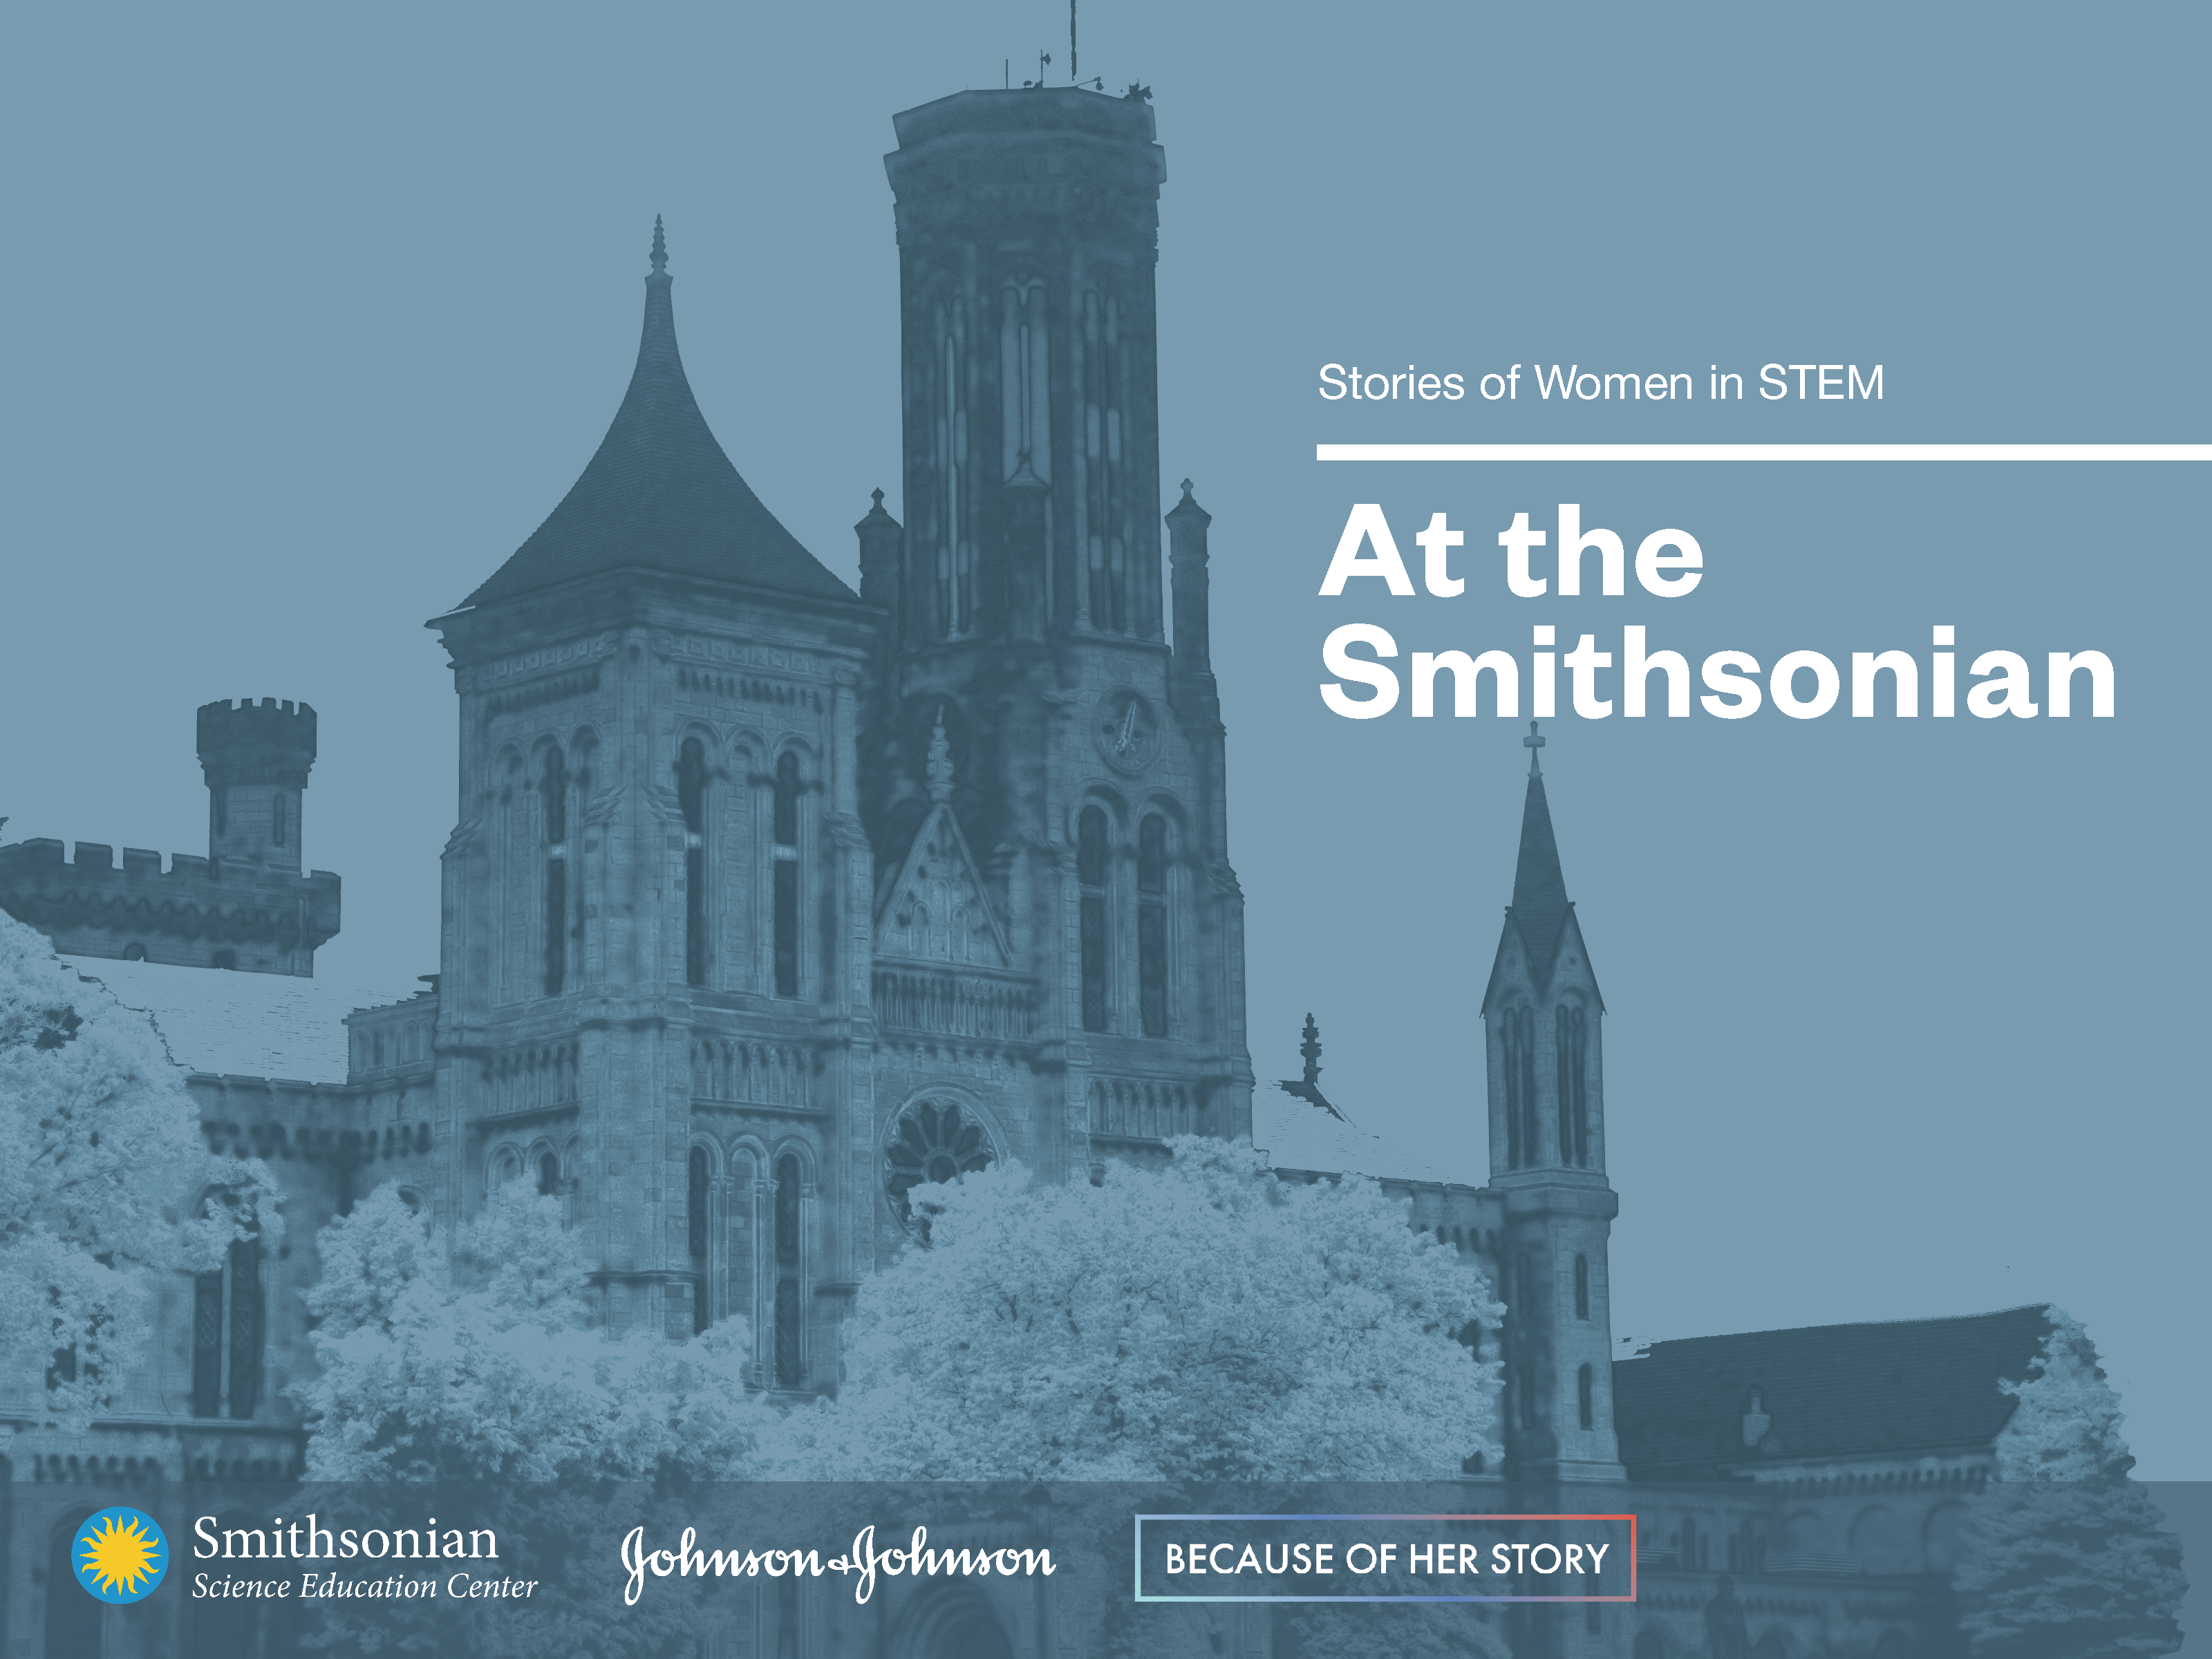 "Stories of Women in STEM at the Smithsonian" Cover